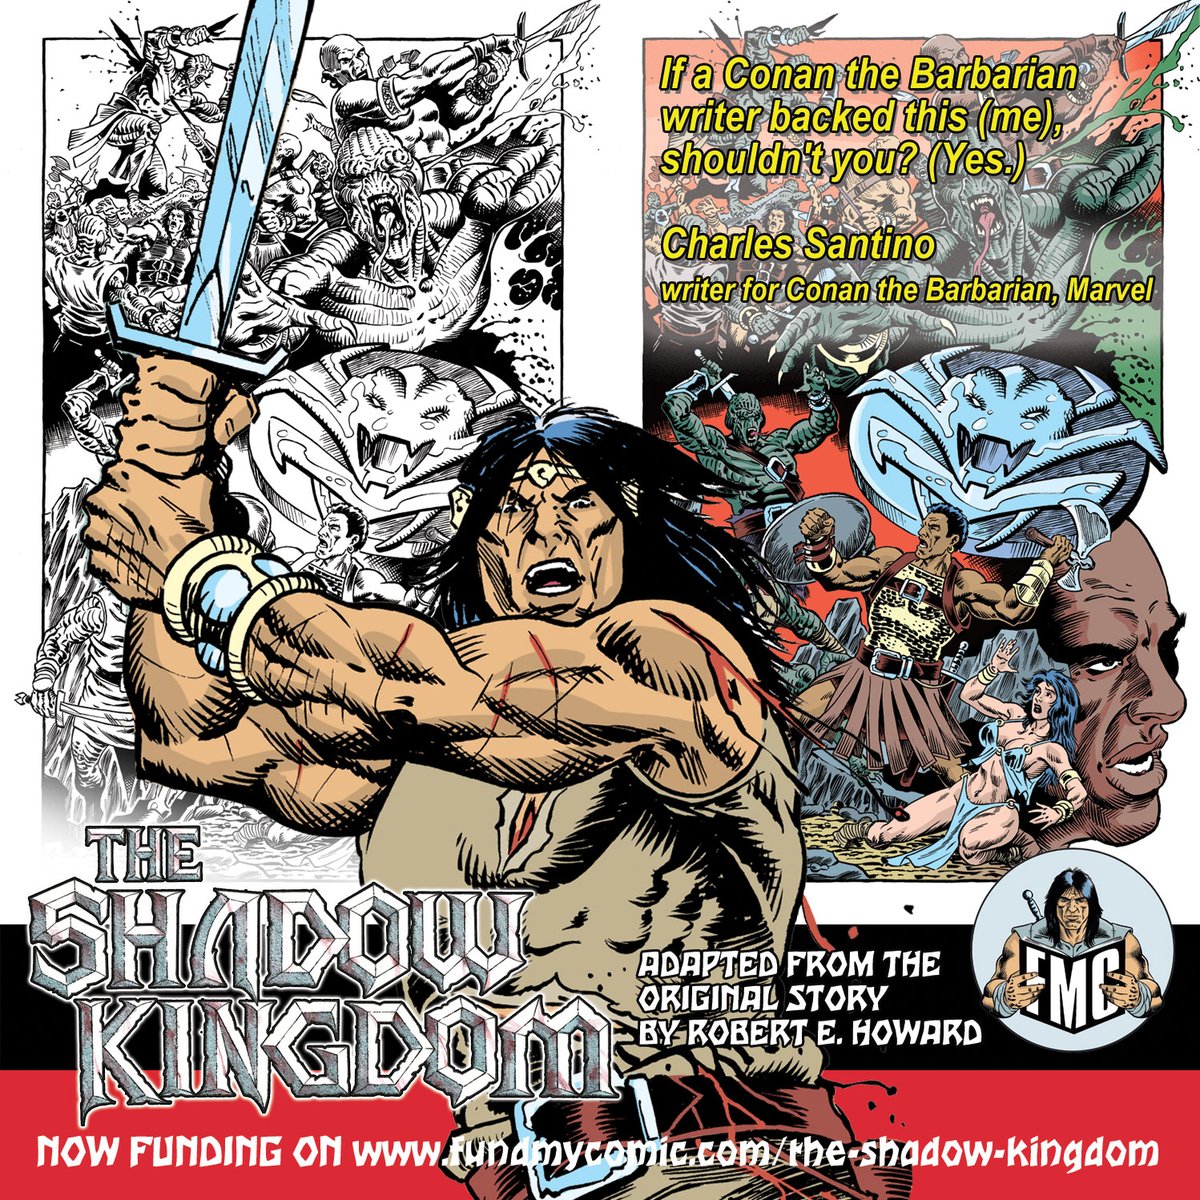 FINAL 24 hours to grab yourself a copy of Robert E Howard's, The Shadow Kingdom available on @fundmycomic with @RandyZimm and @RAZ0RFIST campaign at fundmycomic.com/the-shadow-kin… or sign up for the email list at russleach.com Penciled on: @Wacom Cintiq Program:…